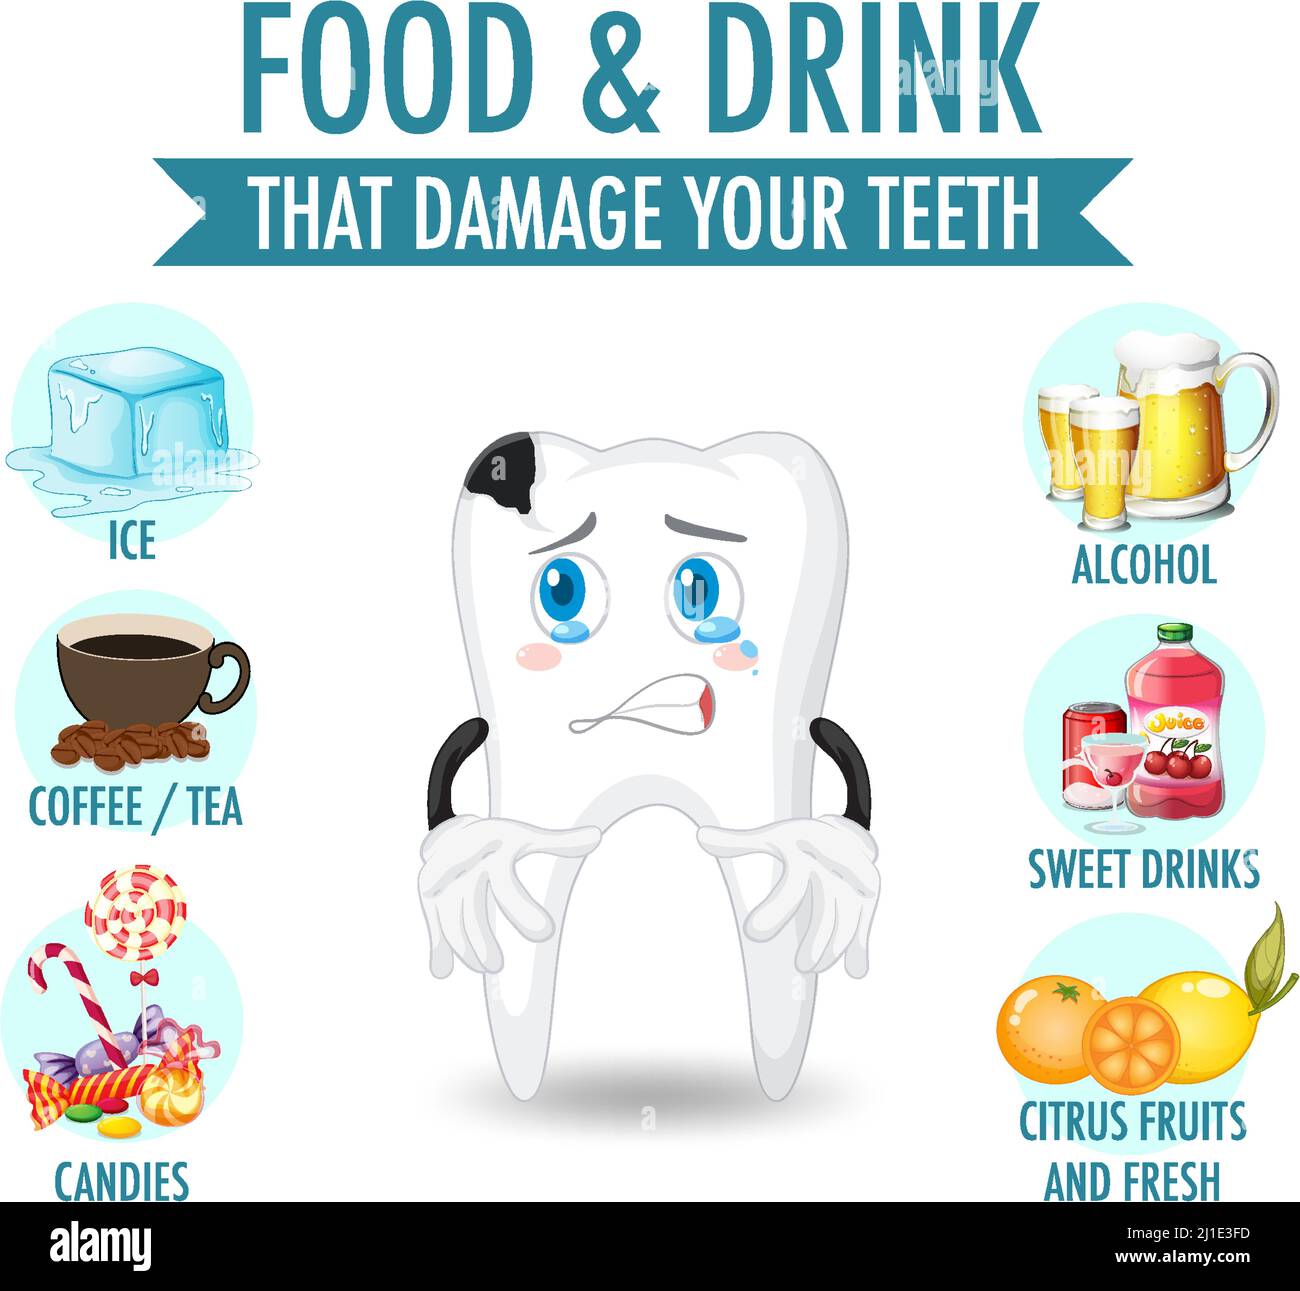 Infographic of food and drink that damage your teeth illustration Stock Vector